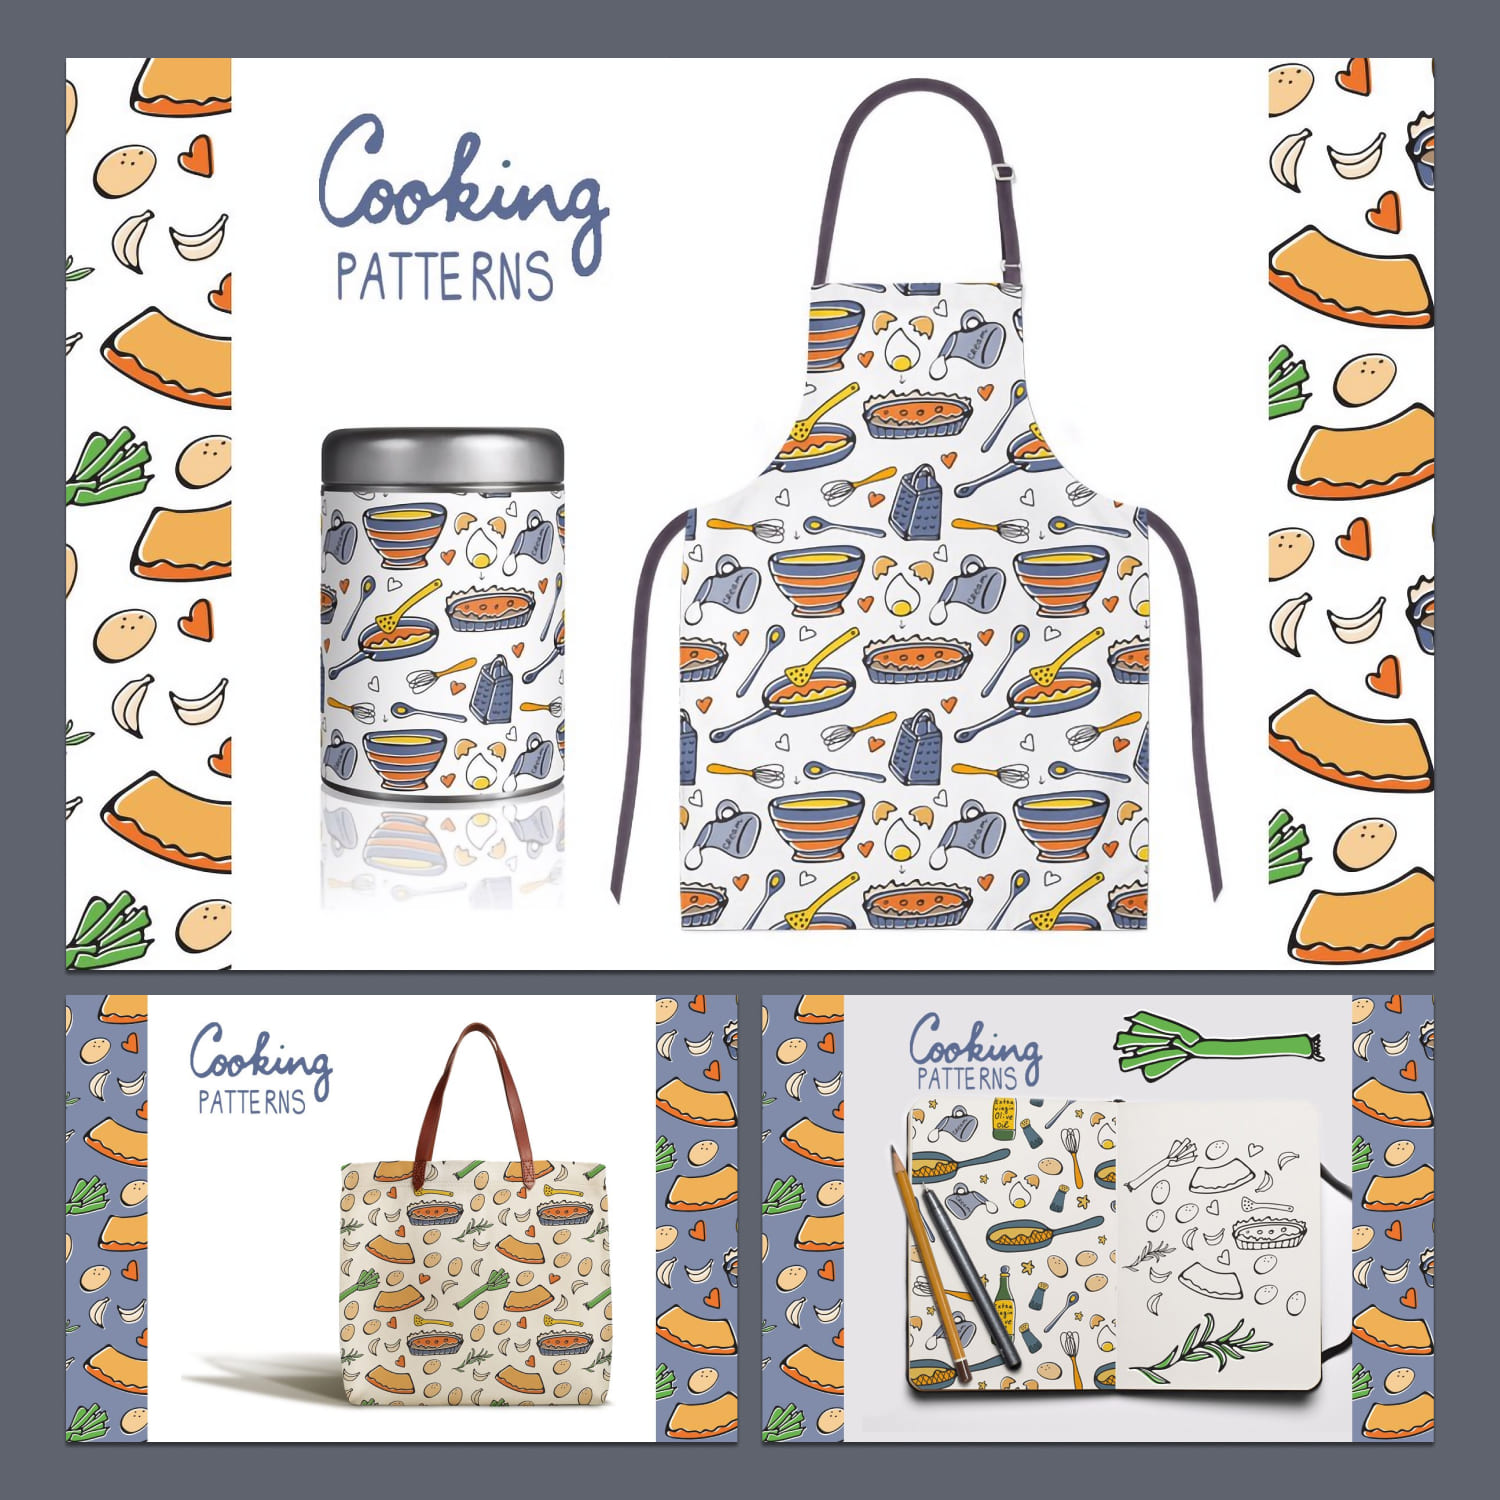 Cooking patterns created by Olillia.